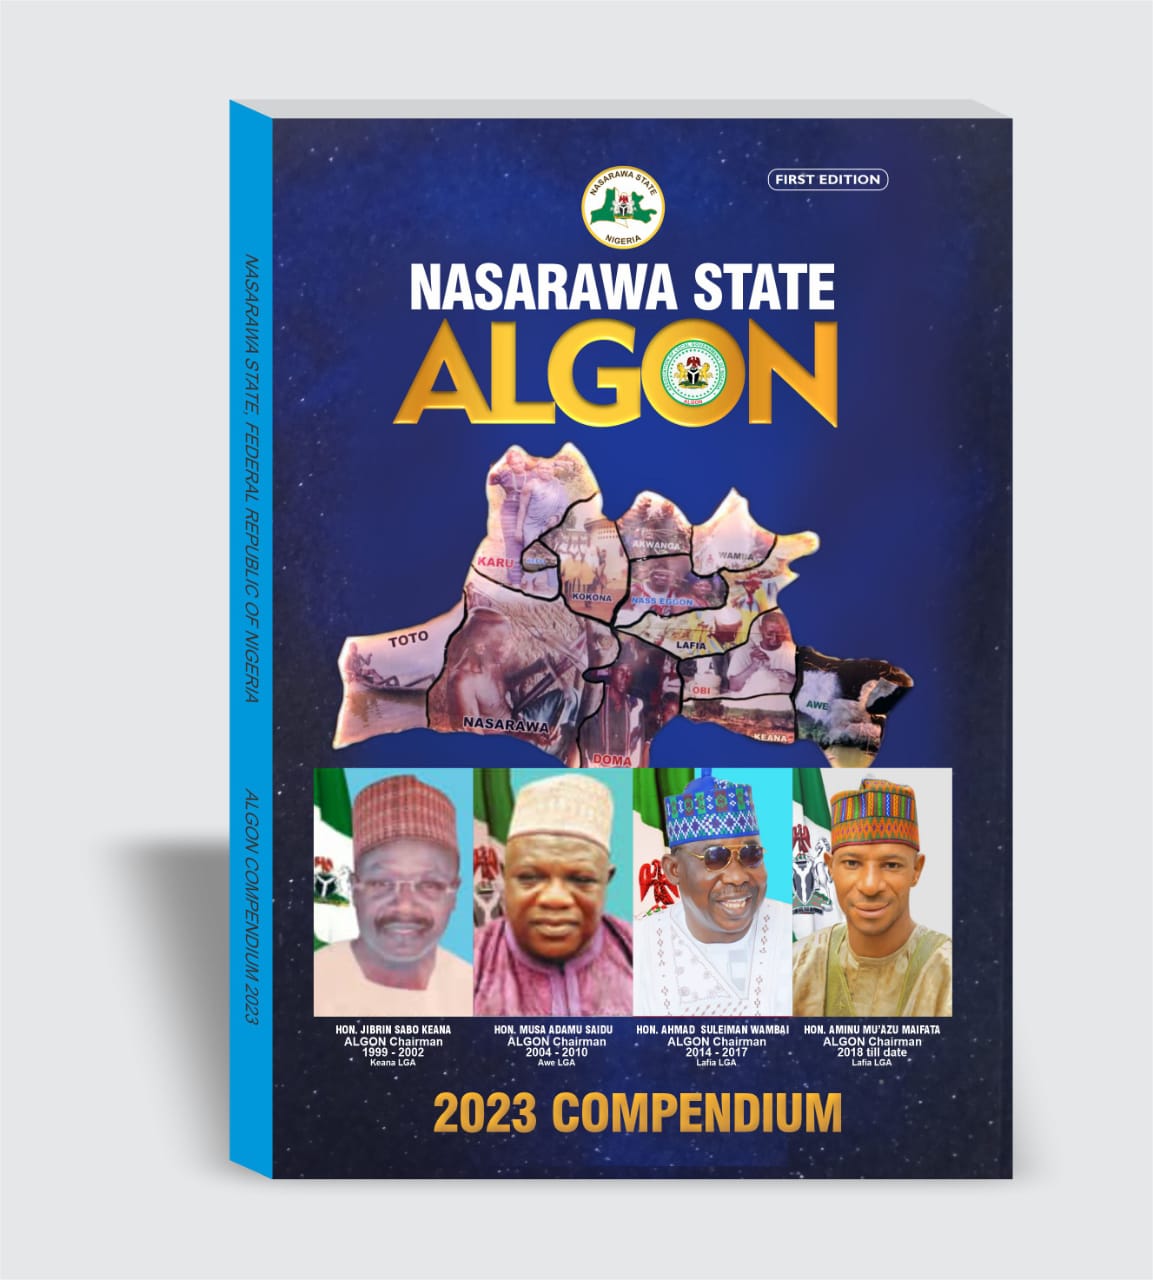 Nasarawa ALGON unveils its first edition of 2023 Compendium to LG Commissioner.